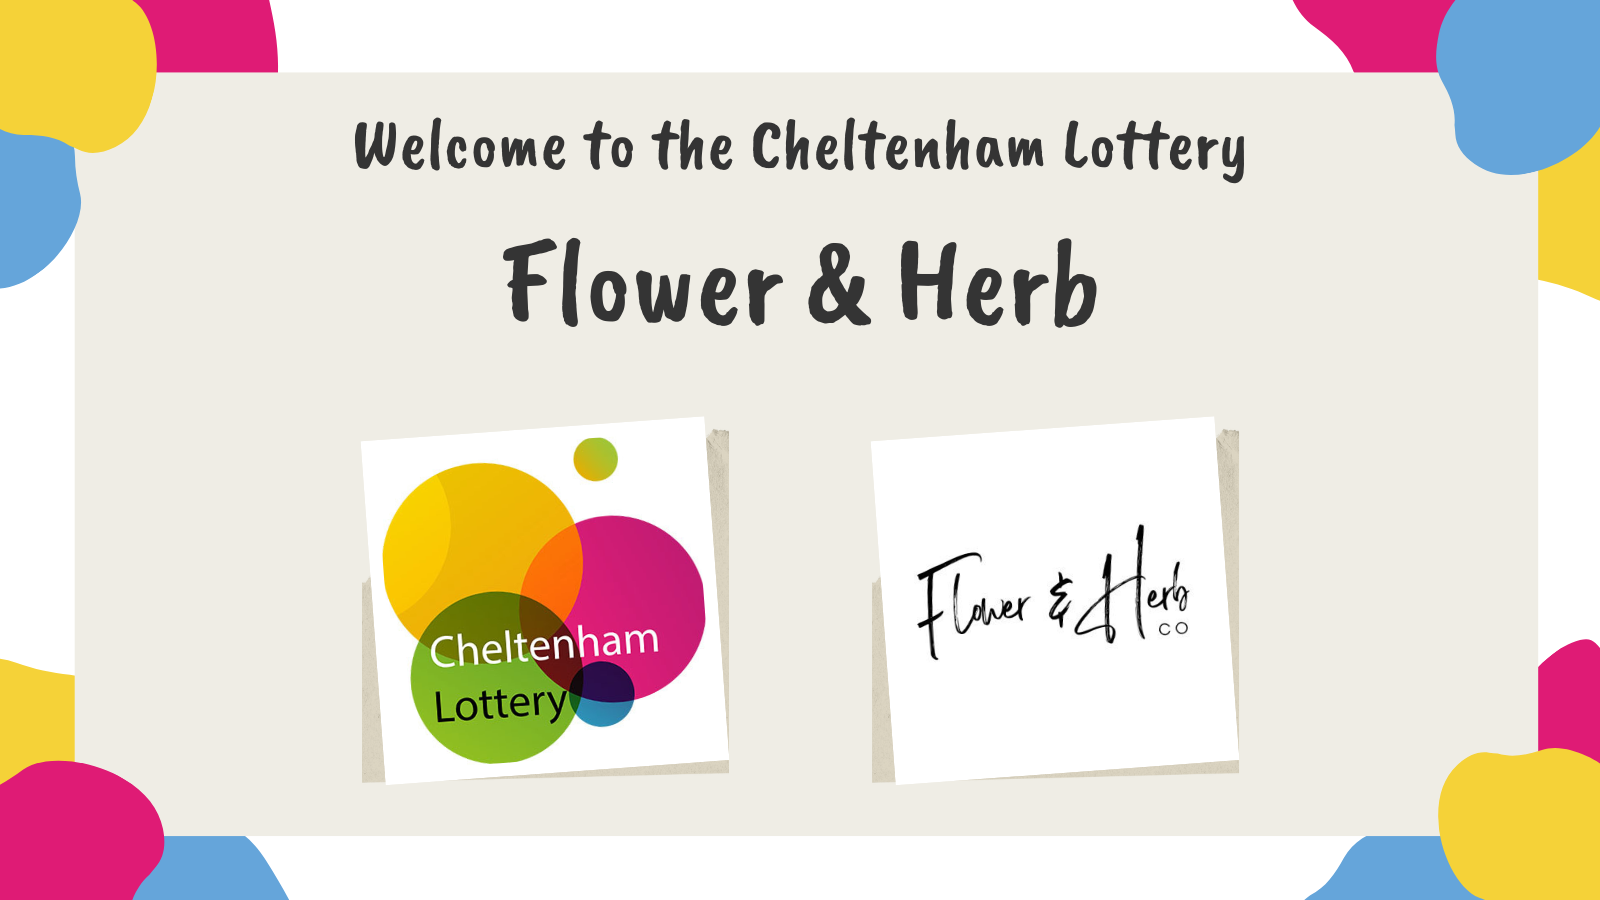 Welcome to the Cheltenham Lottery Flower & Herb